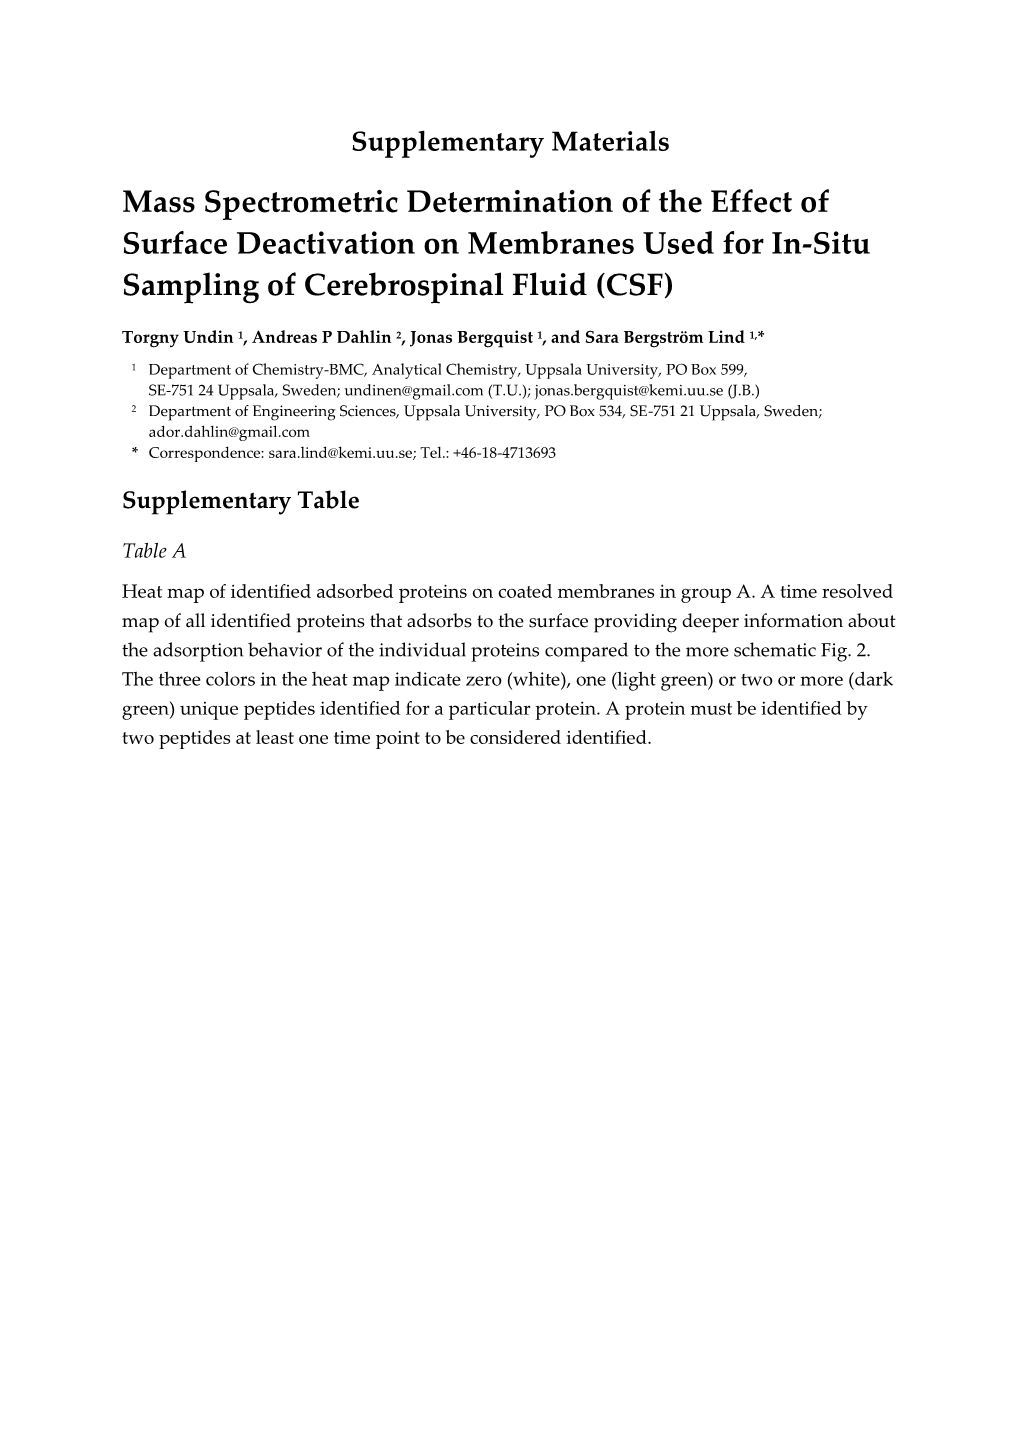 Mass Spectrometric Determination of the Effect of Surface Deactivation on Membranes Used for In-Situ Sampling of Cerebrospinal Fluid (CSF)